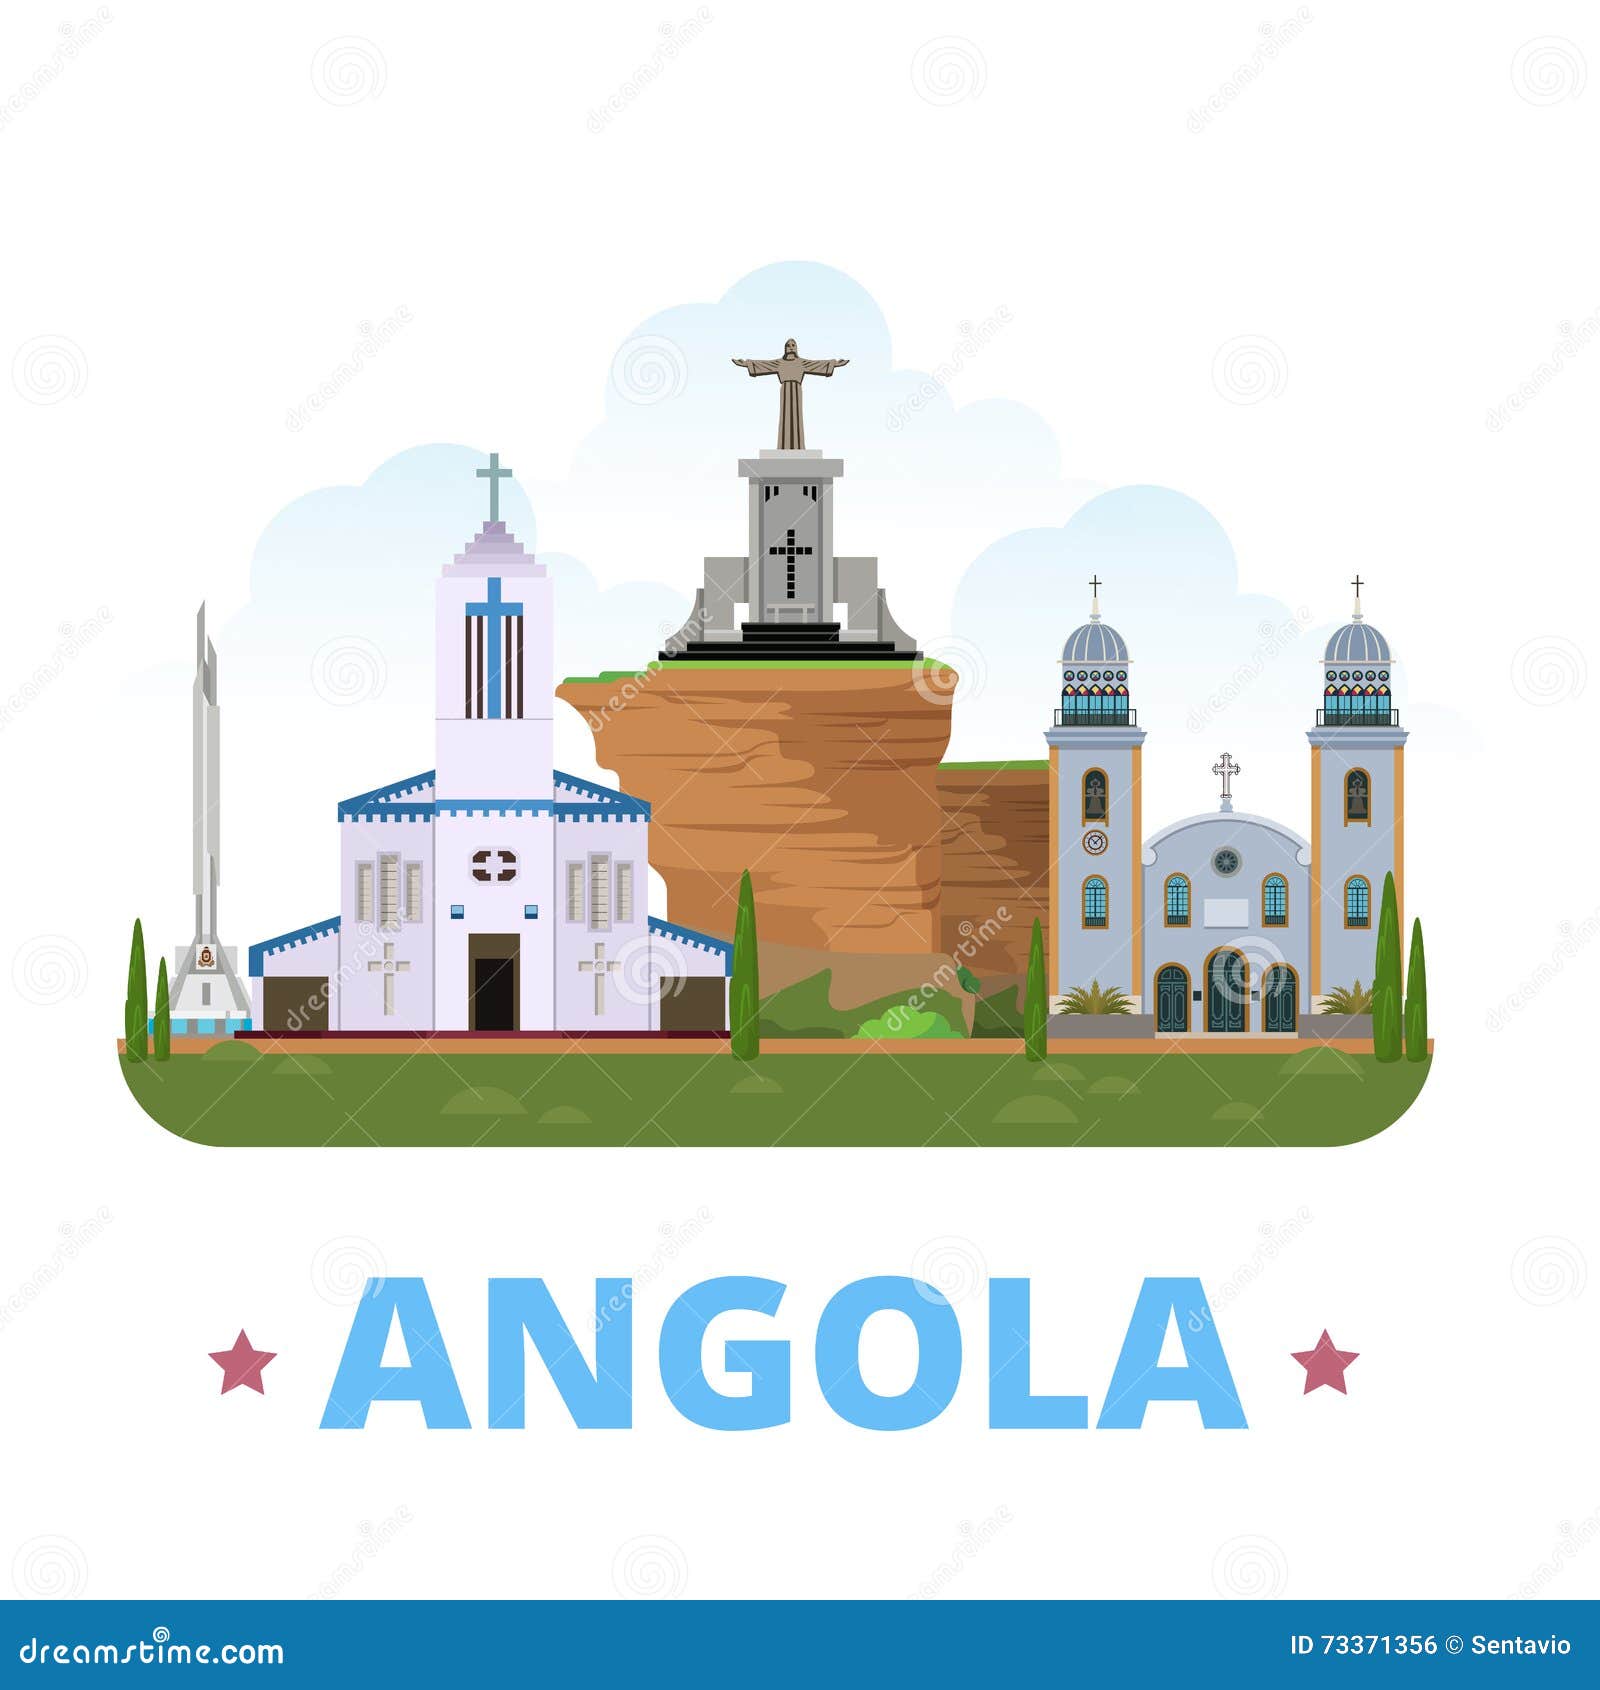 angola country  template flat cartoon style